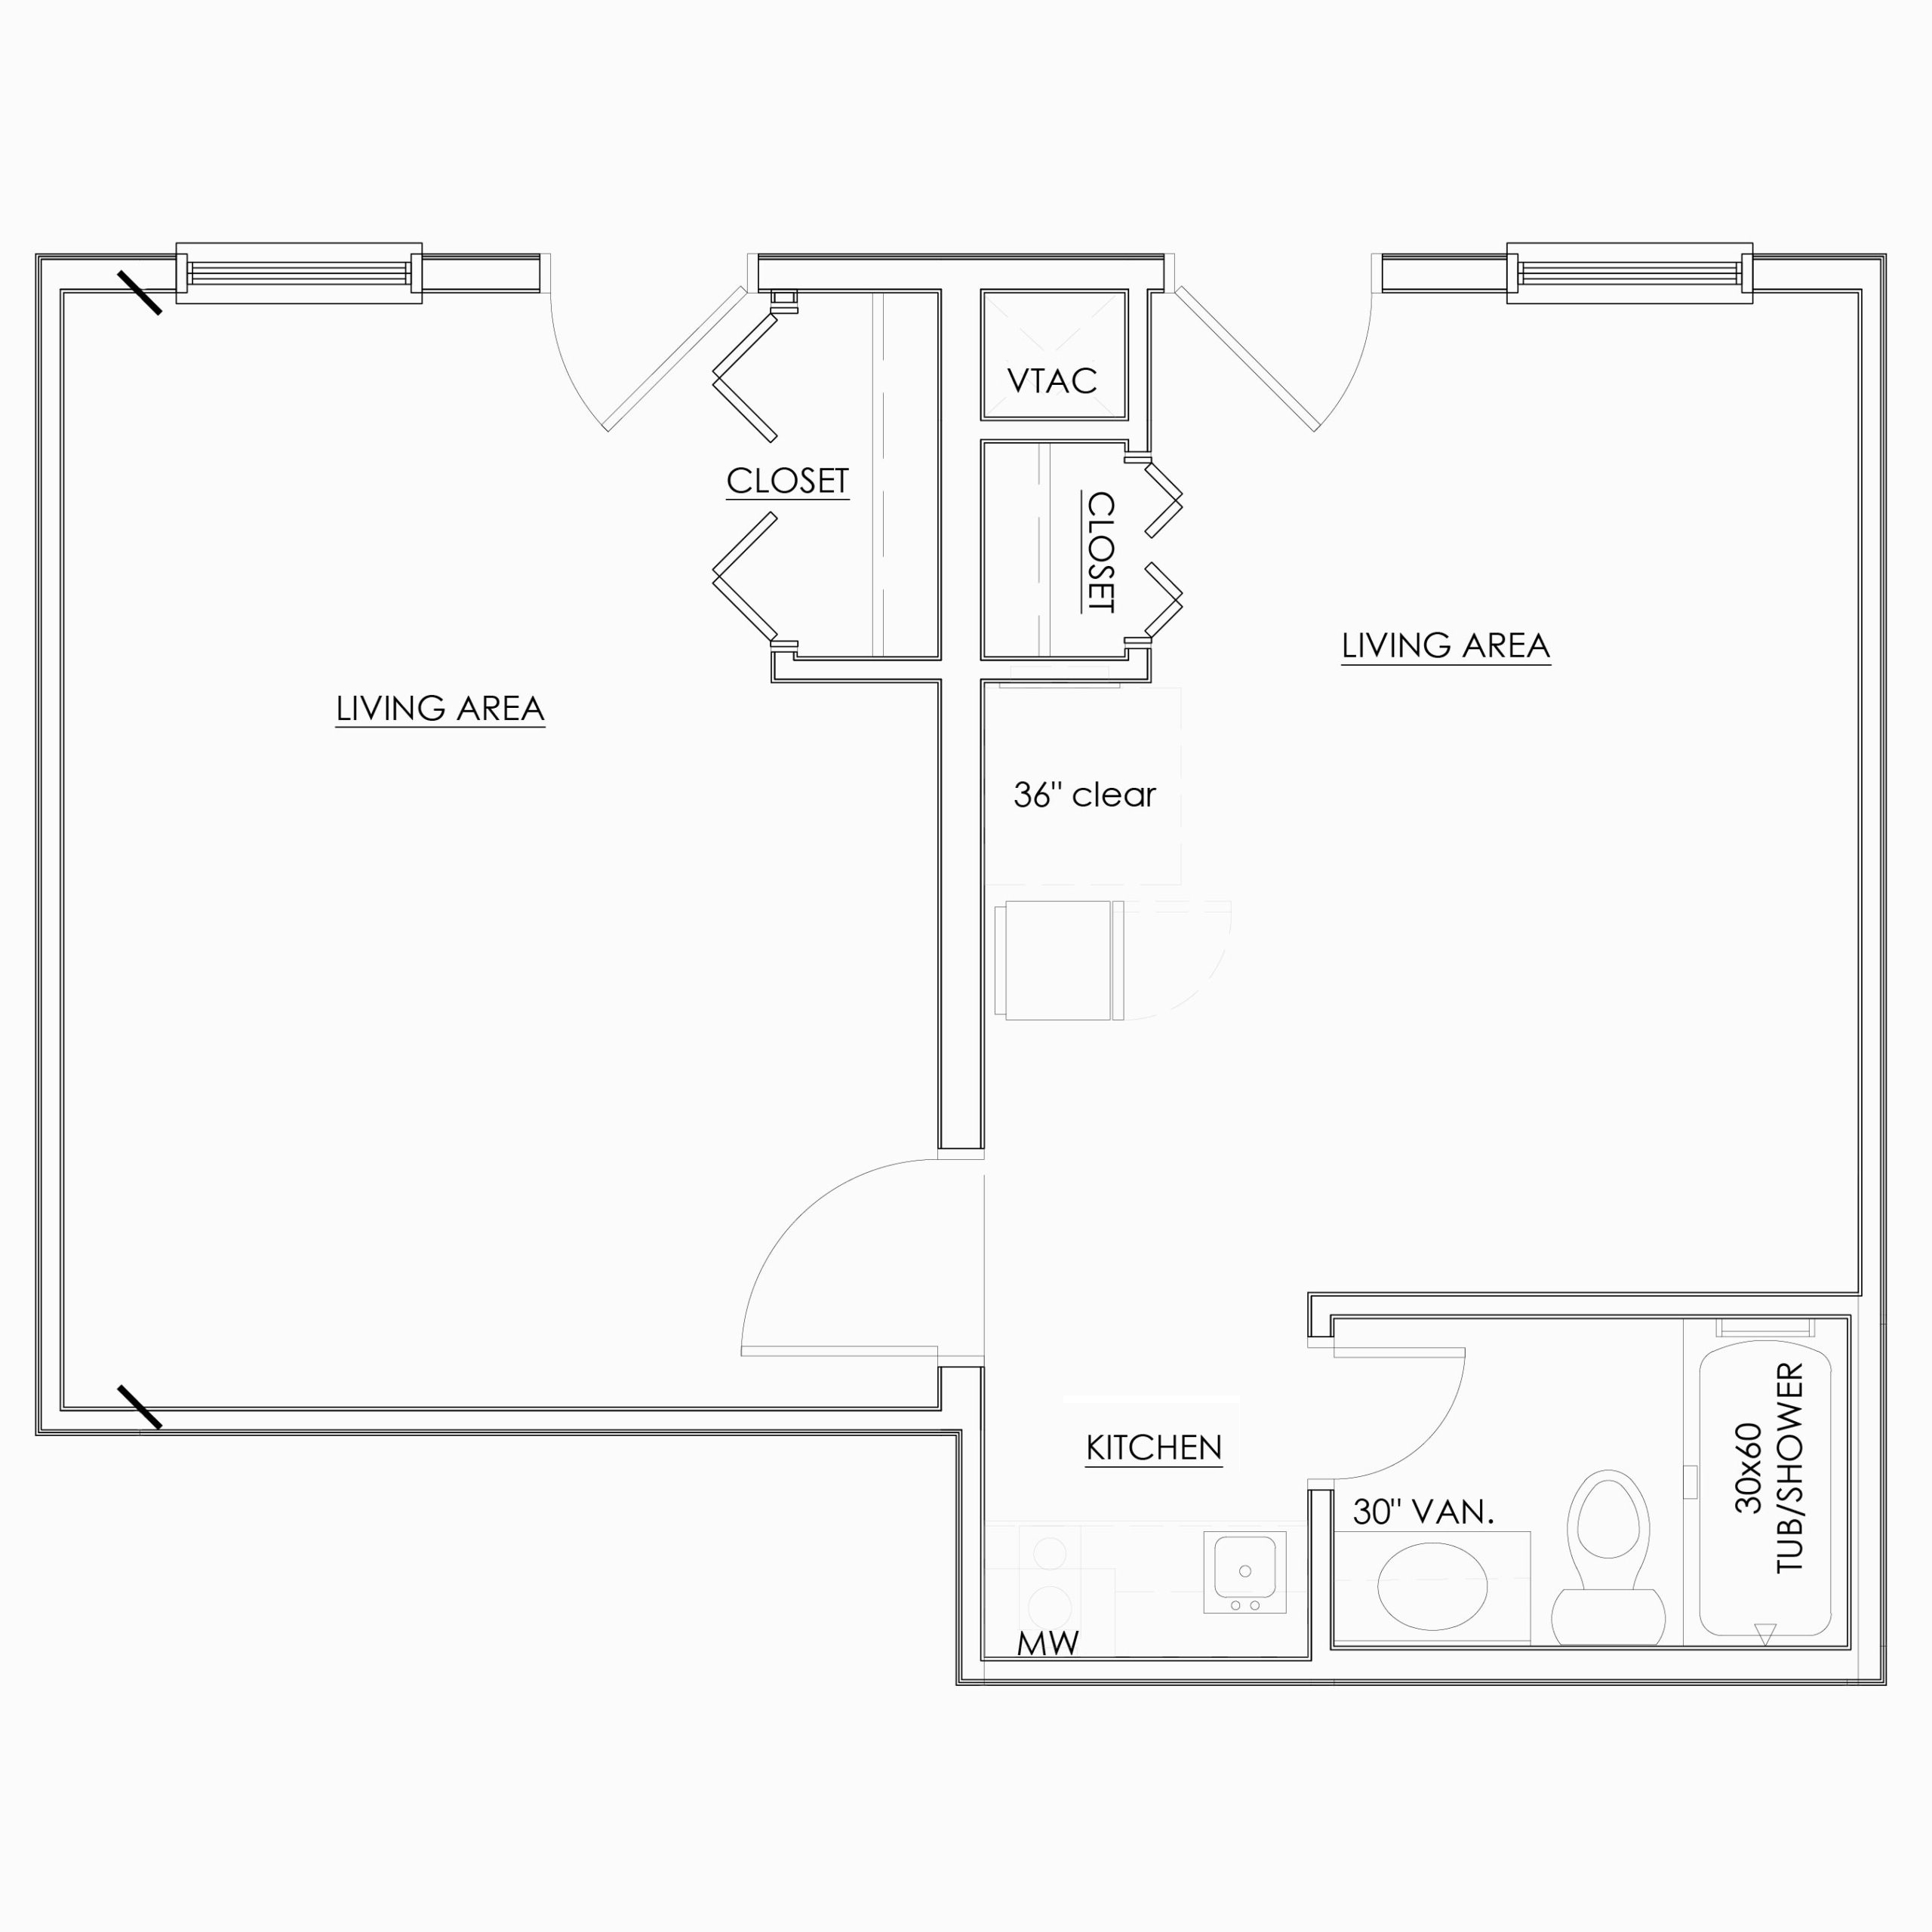 Apartment A1 floor plan with large living areas and separate bedroom, closet, bathroom, and kitchen areas